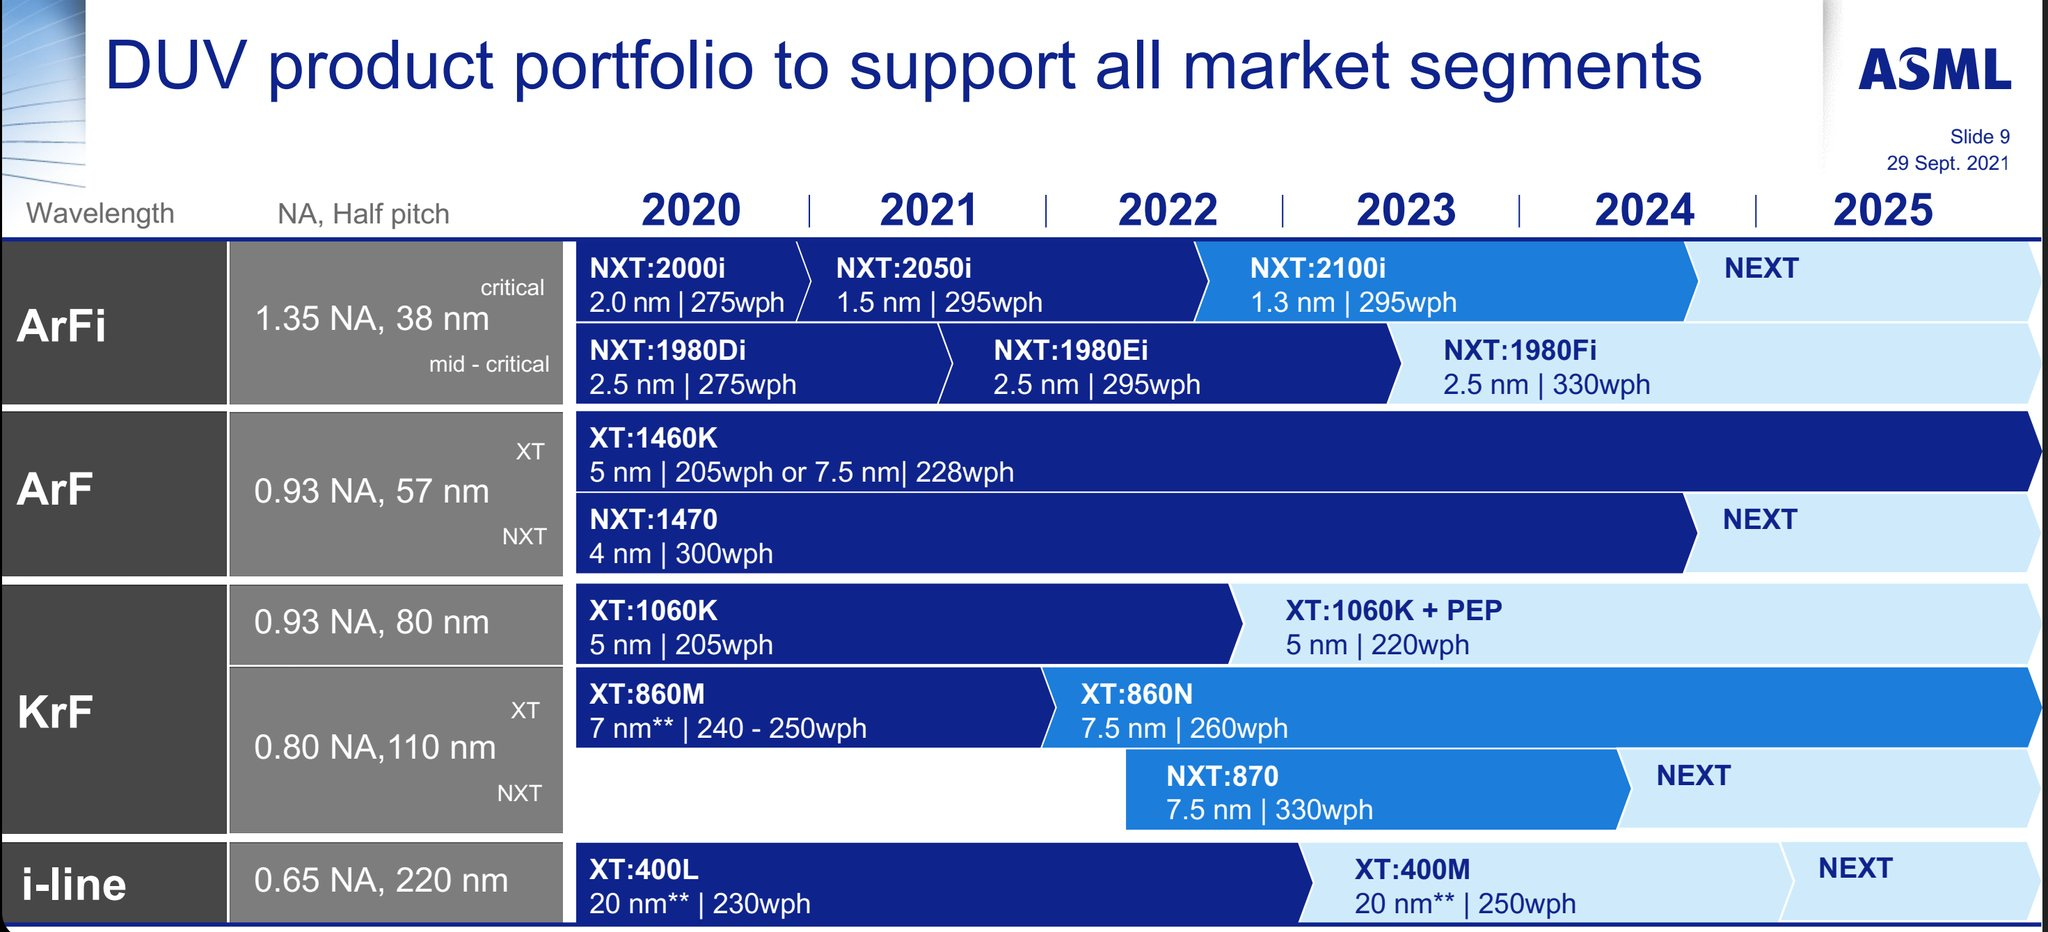 The Gaps In The New China Lithography Restrictions – ASML, SMEE, Nikon, Canon, EUV, DUV, ArFi, ArF Dry, KrF, and Photoresist